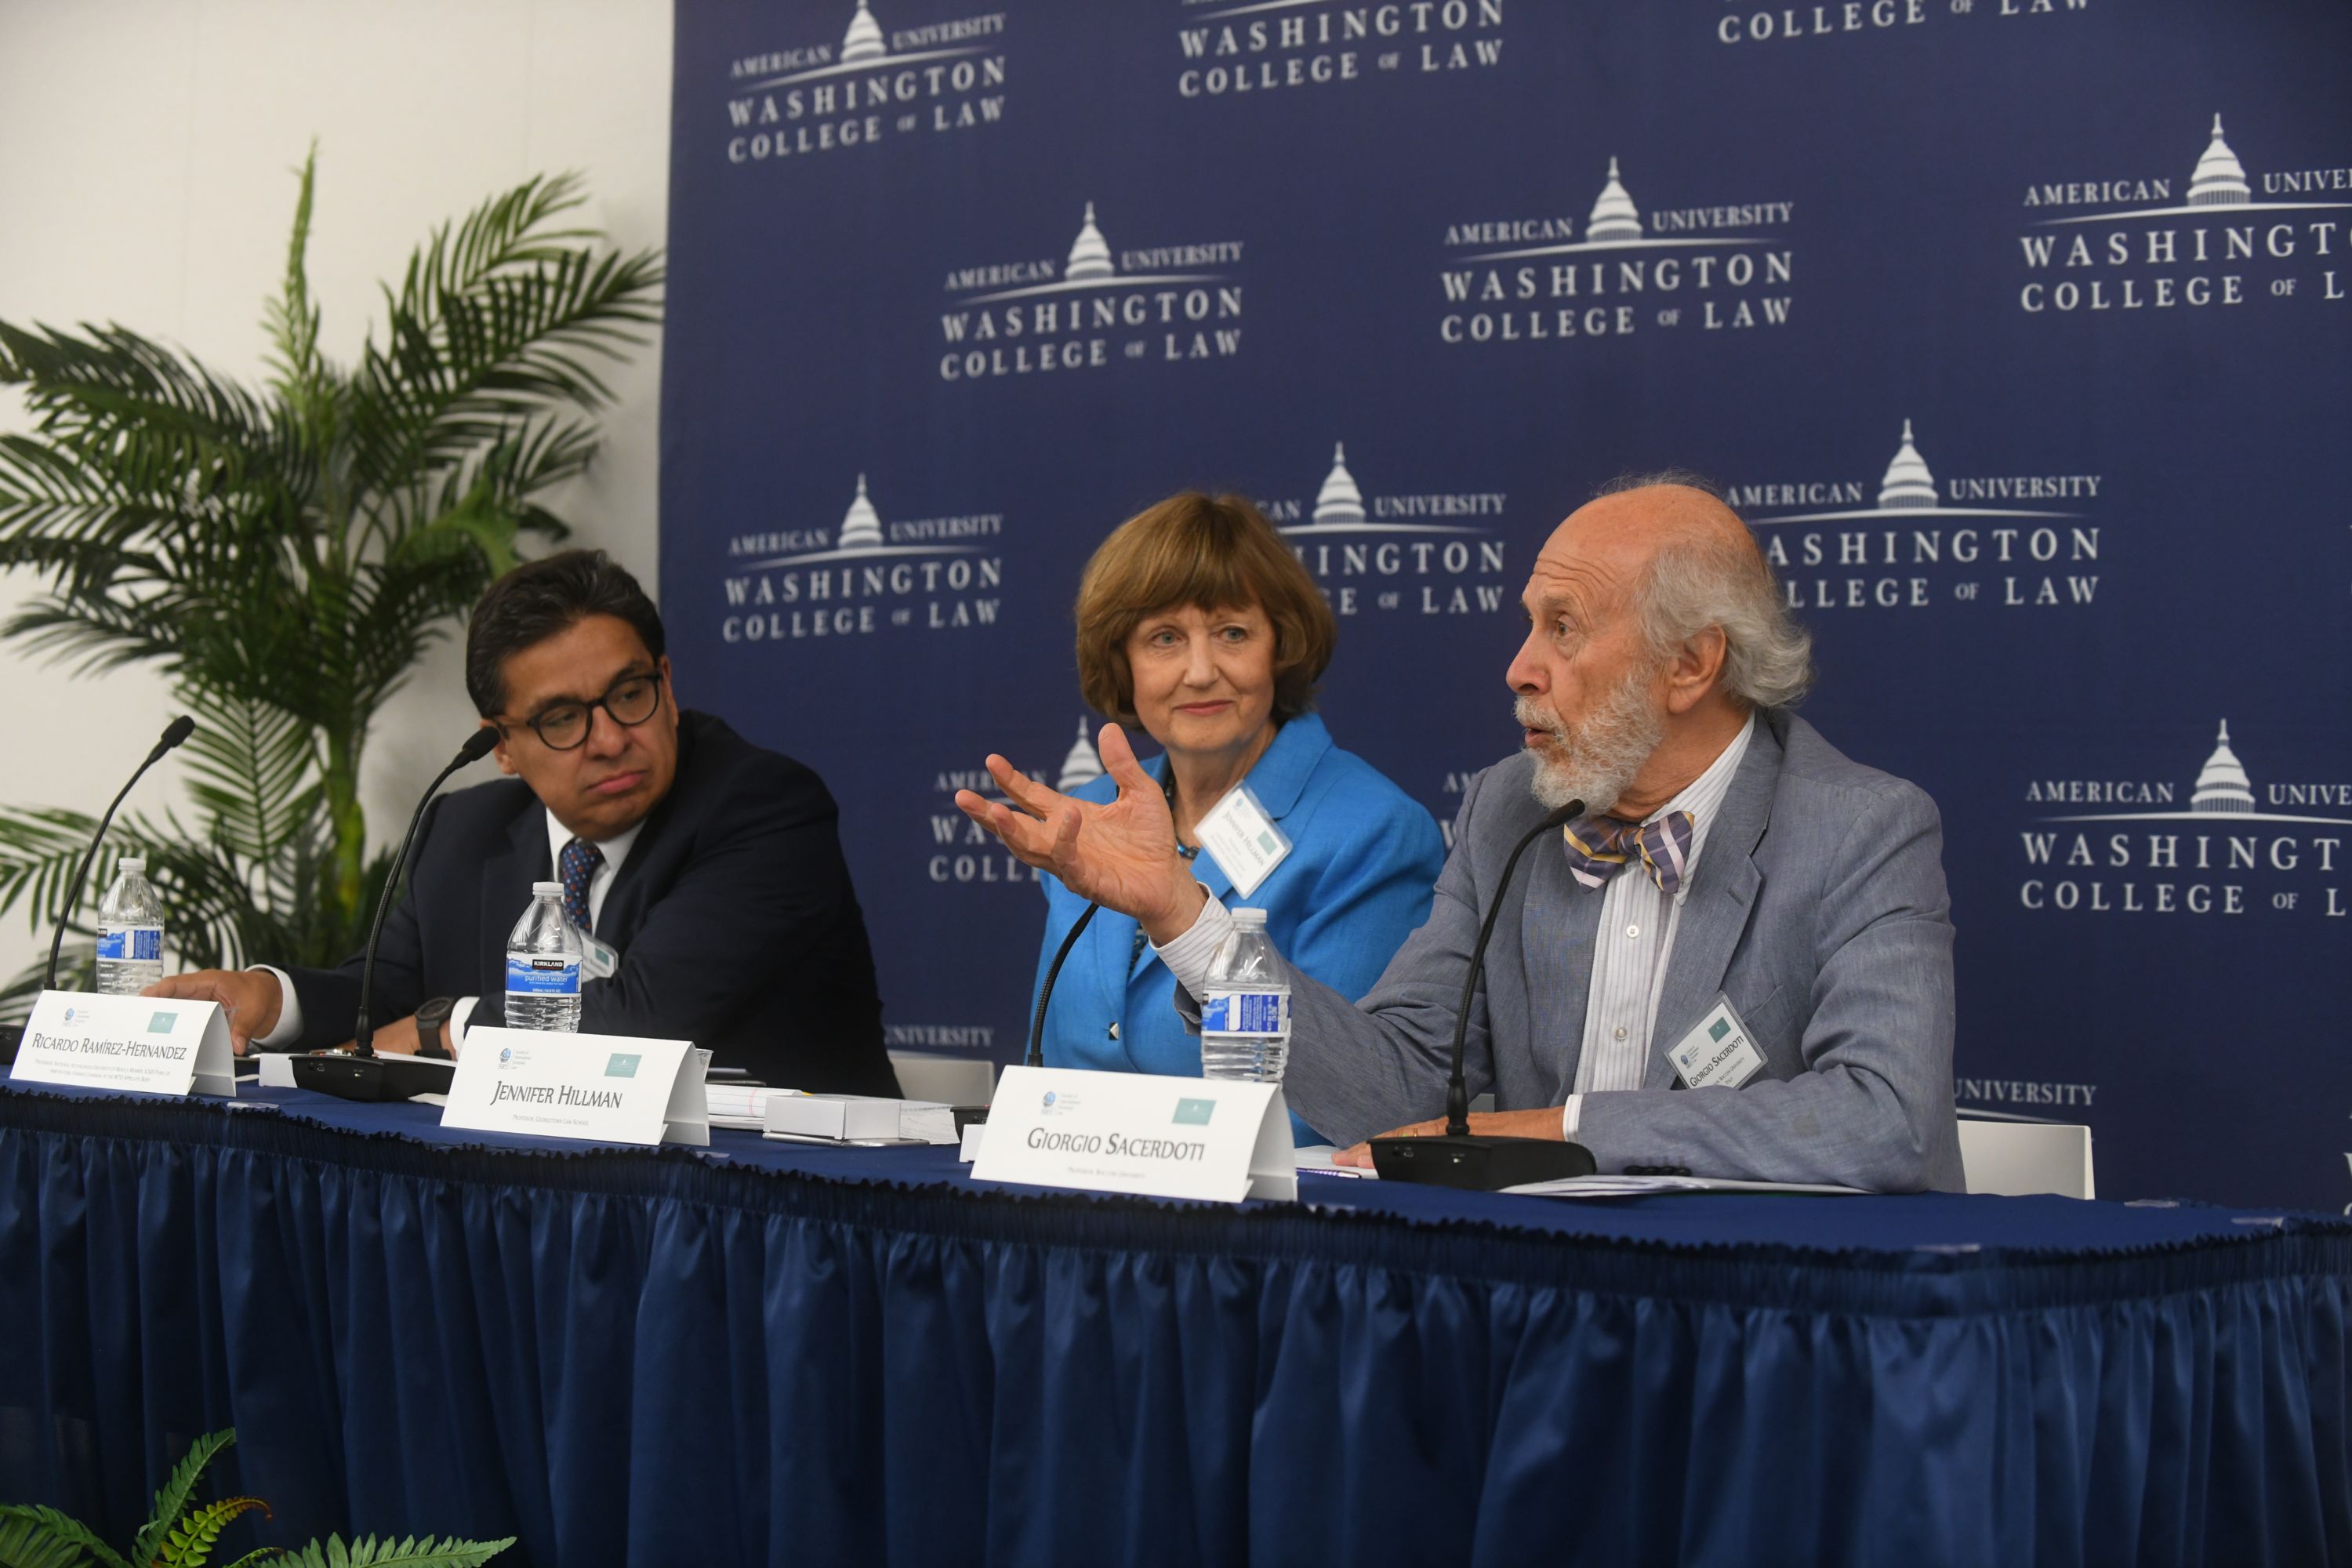 Panel on “A Conversation on the WTO Appellate Body in Unsettling Times”. Left to right: Ricardo Ramirez-Hernandez, Former Chairman of the WTO Appellate Body, Jennifer Hillman, Georgetown Law School, and Giorgio Sacerdoti, Bocconi University.